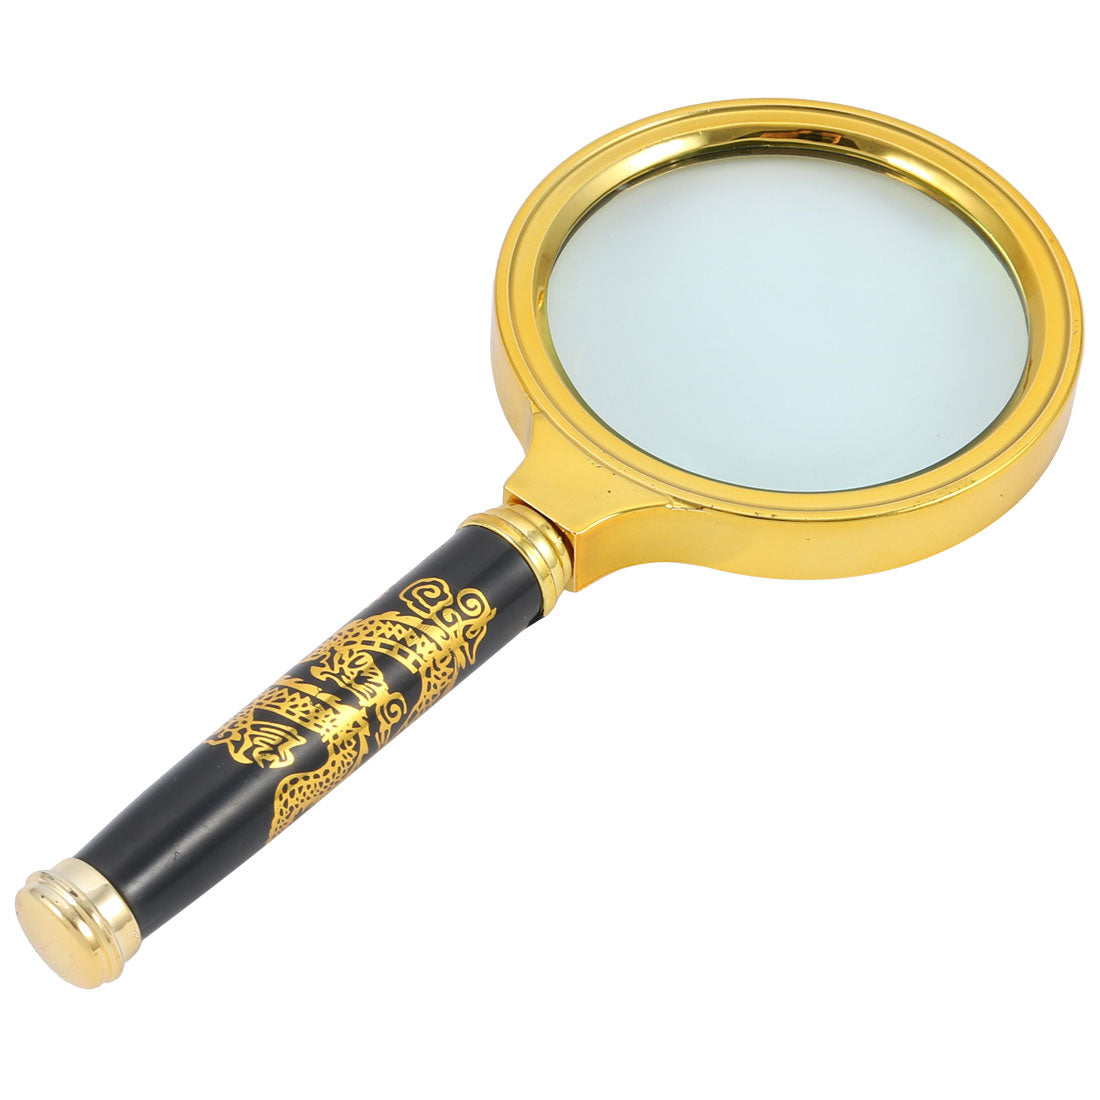 uxcell Uxcell Handheld 10X Magnifying Glass Book Magnifier Loupe Gold Tone